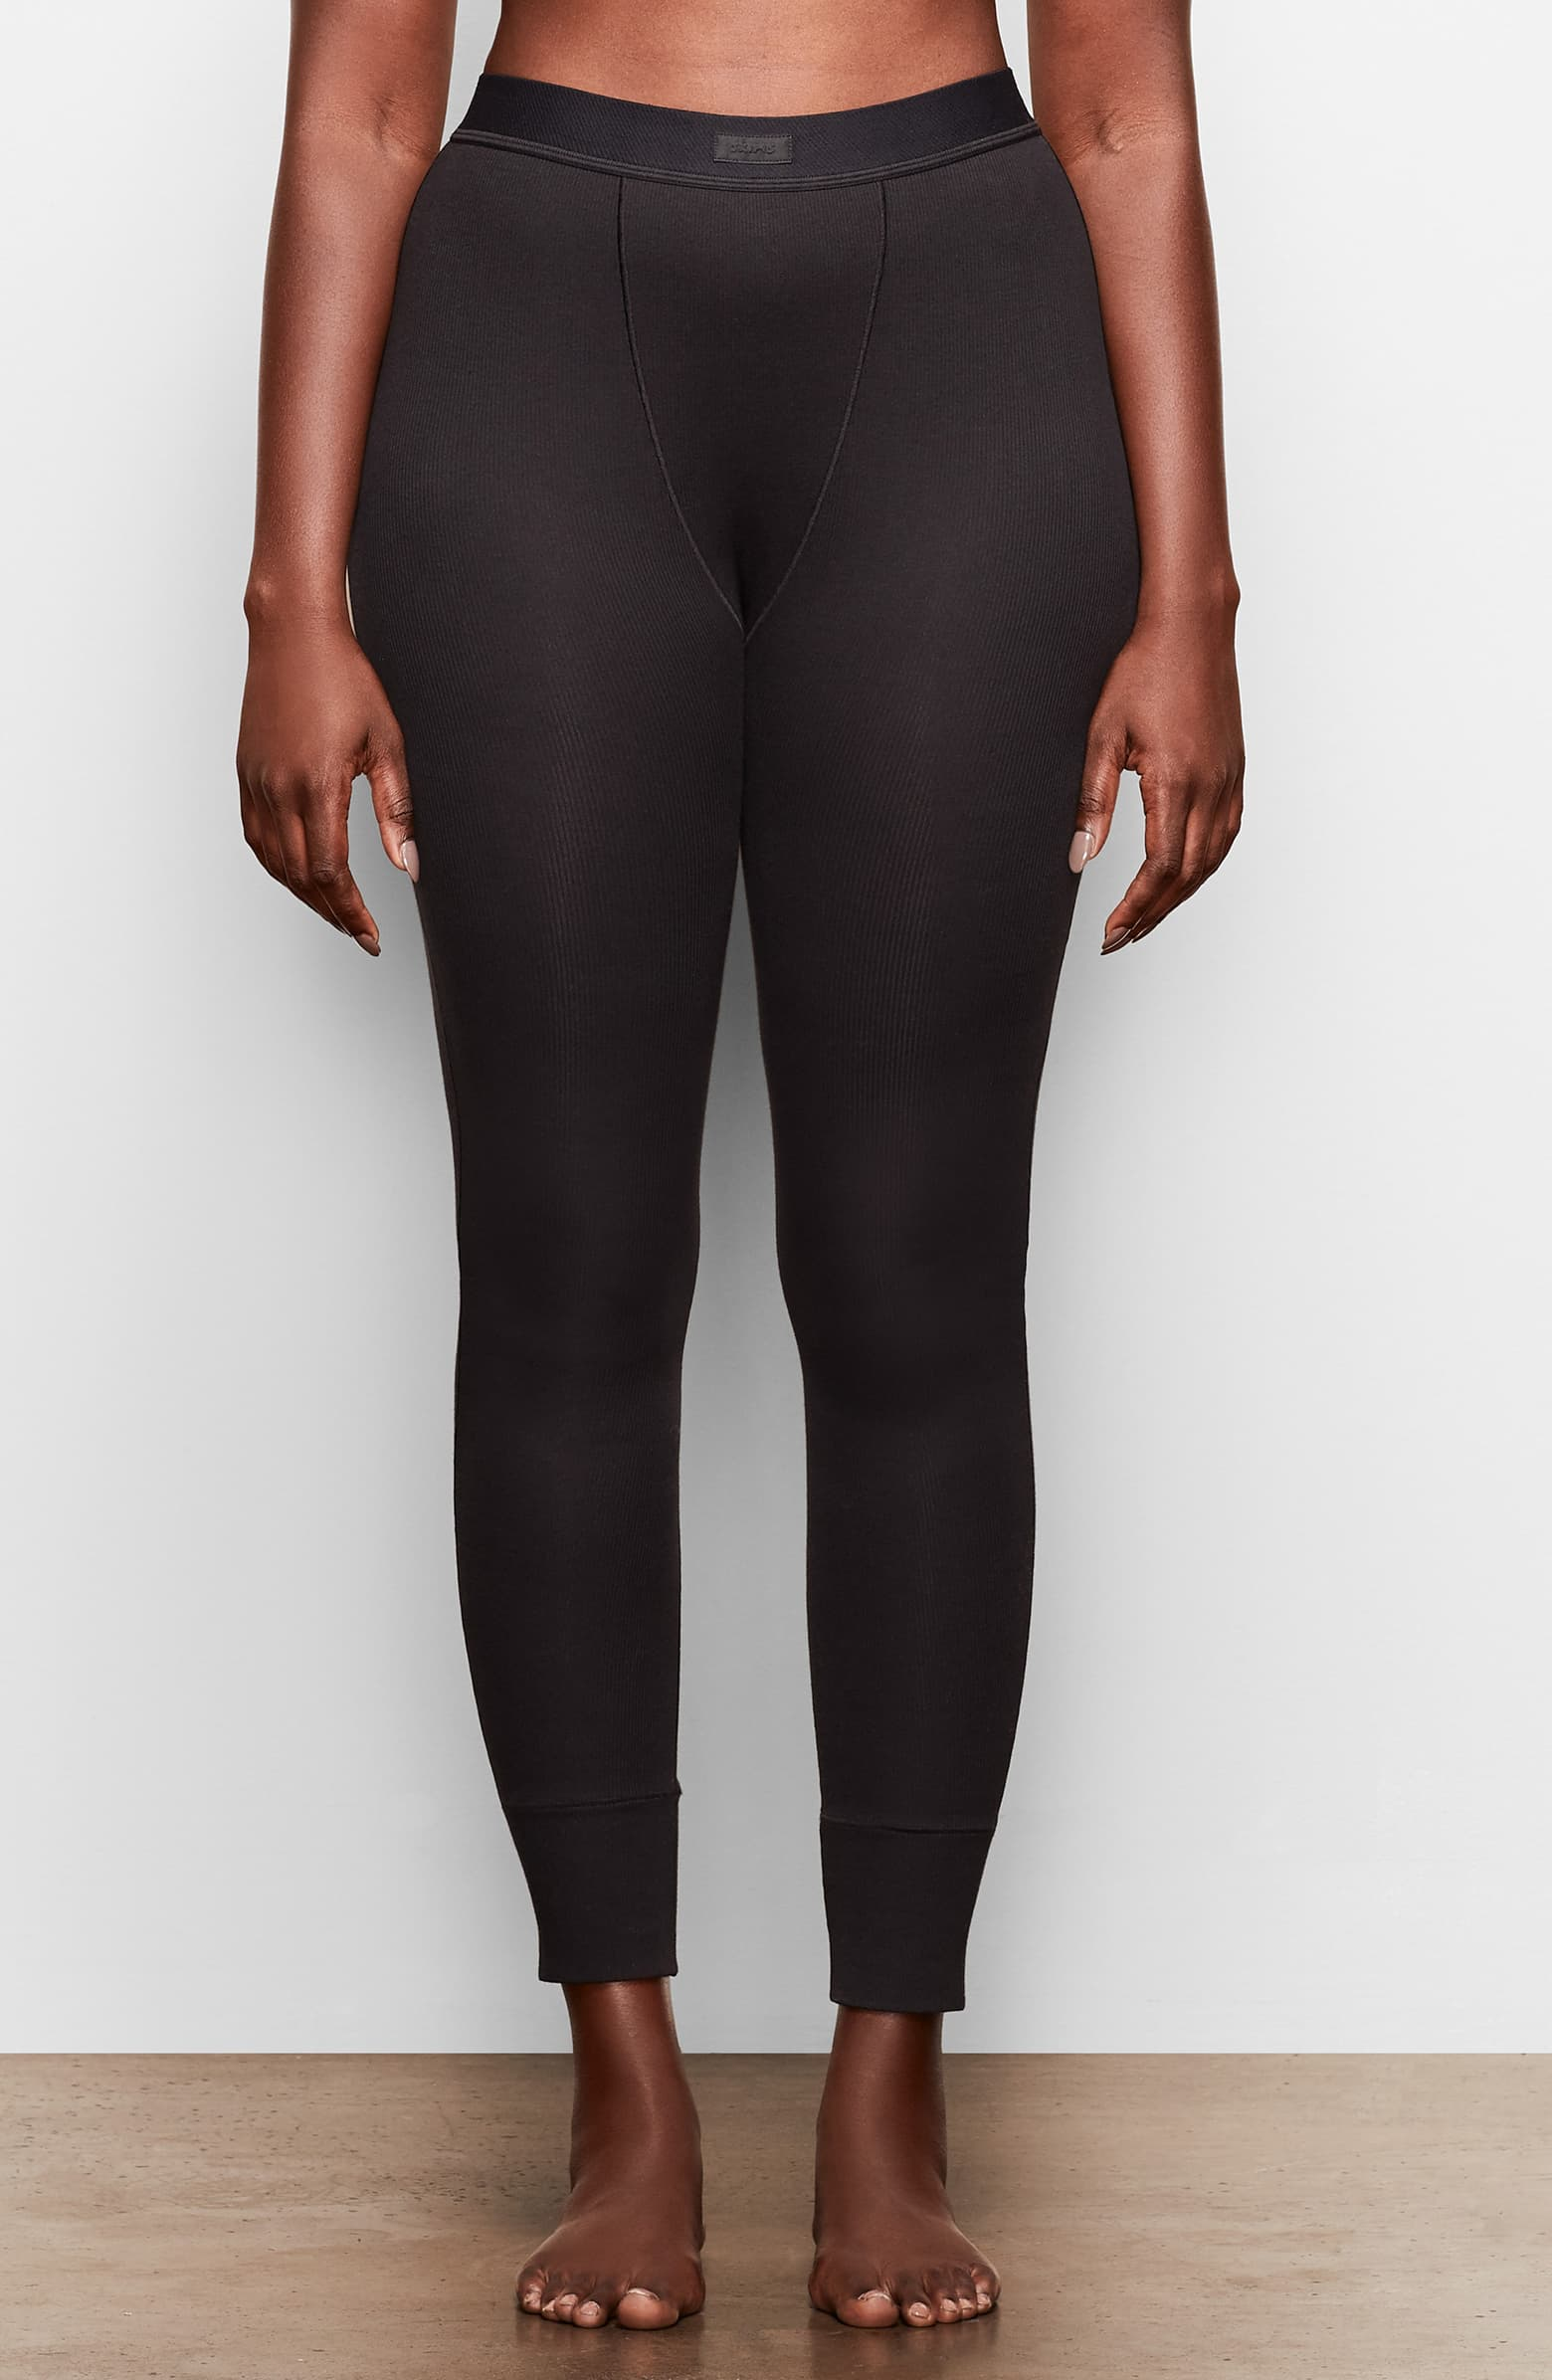 Butter Soft Leggings - Smoked Spruce – V.S. Style Boutique